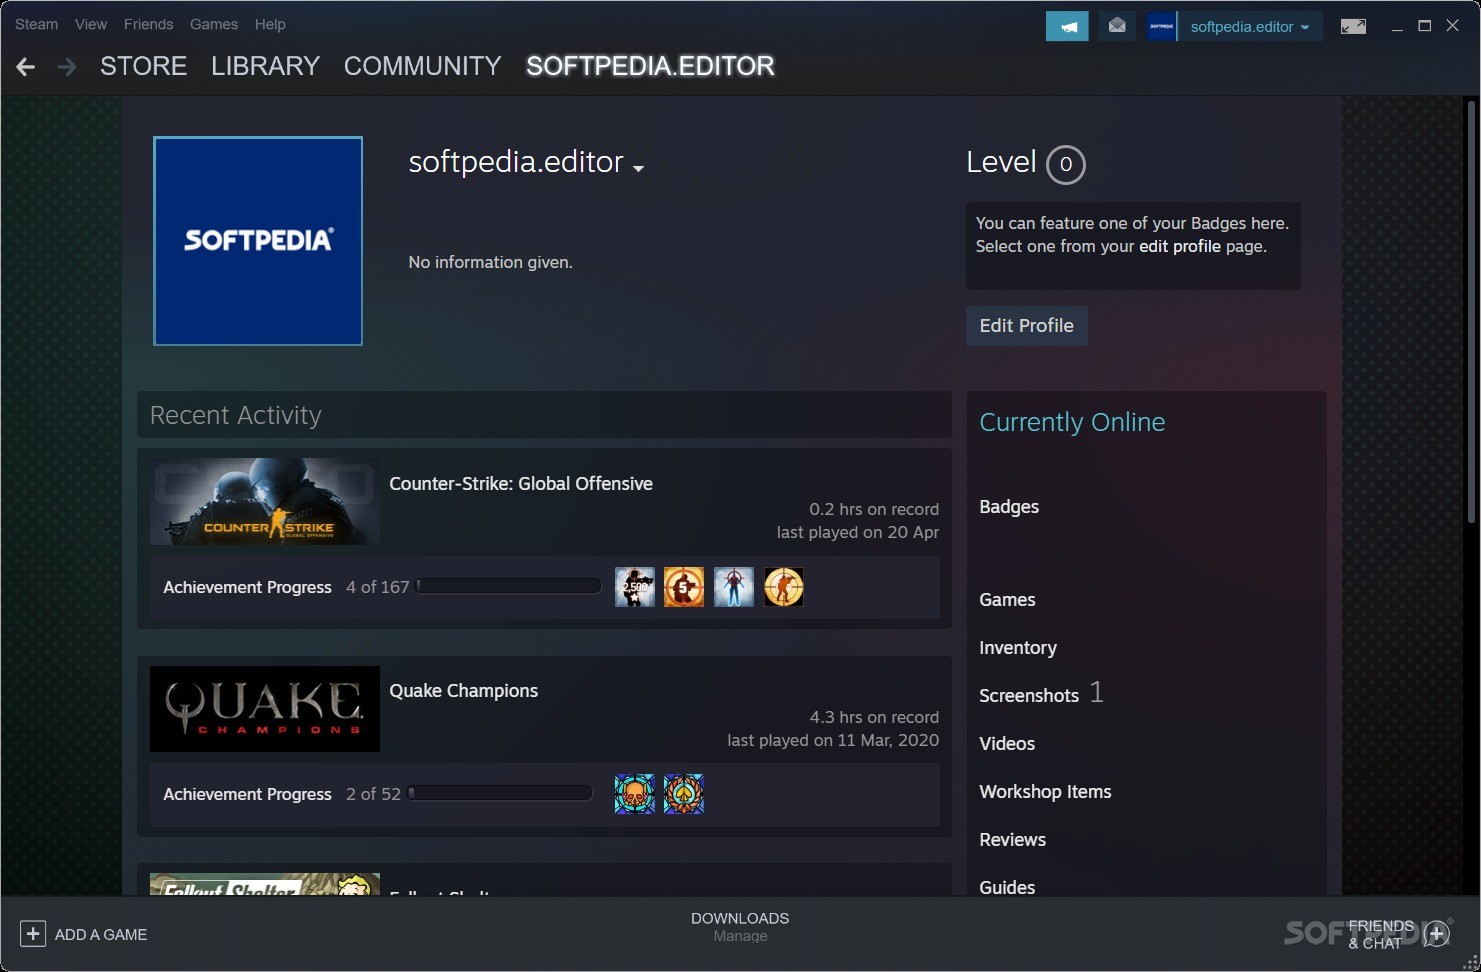 Steam Review: the Launcher for PC Gaming